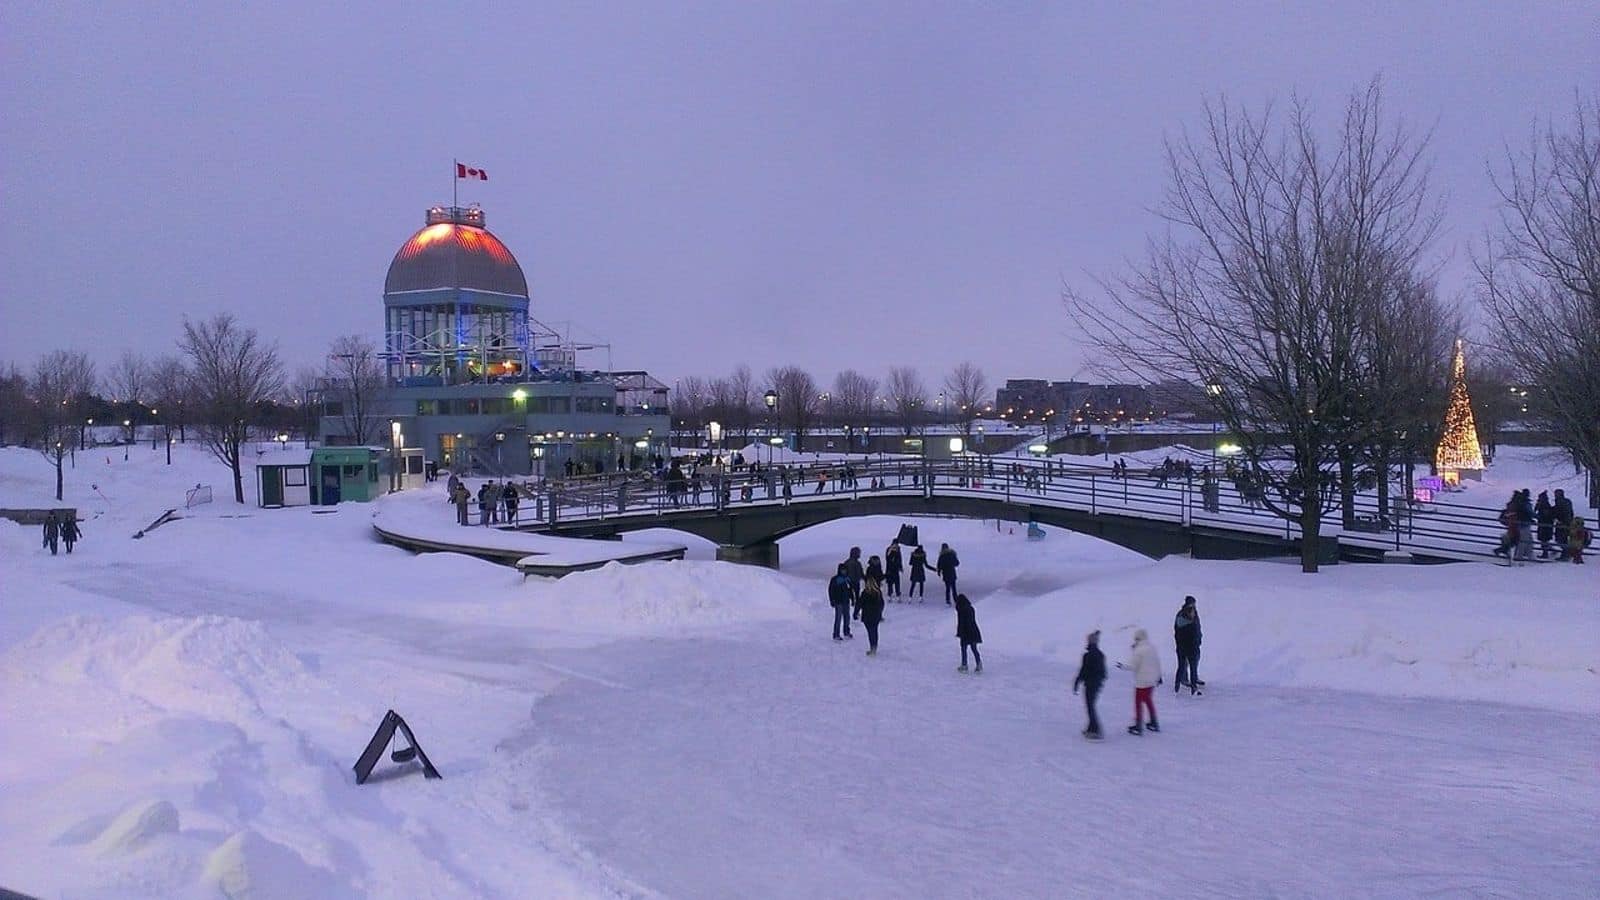 Head over to Montreal's magical winter escapes with this guide